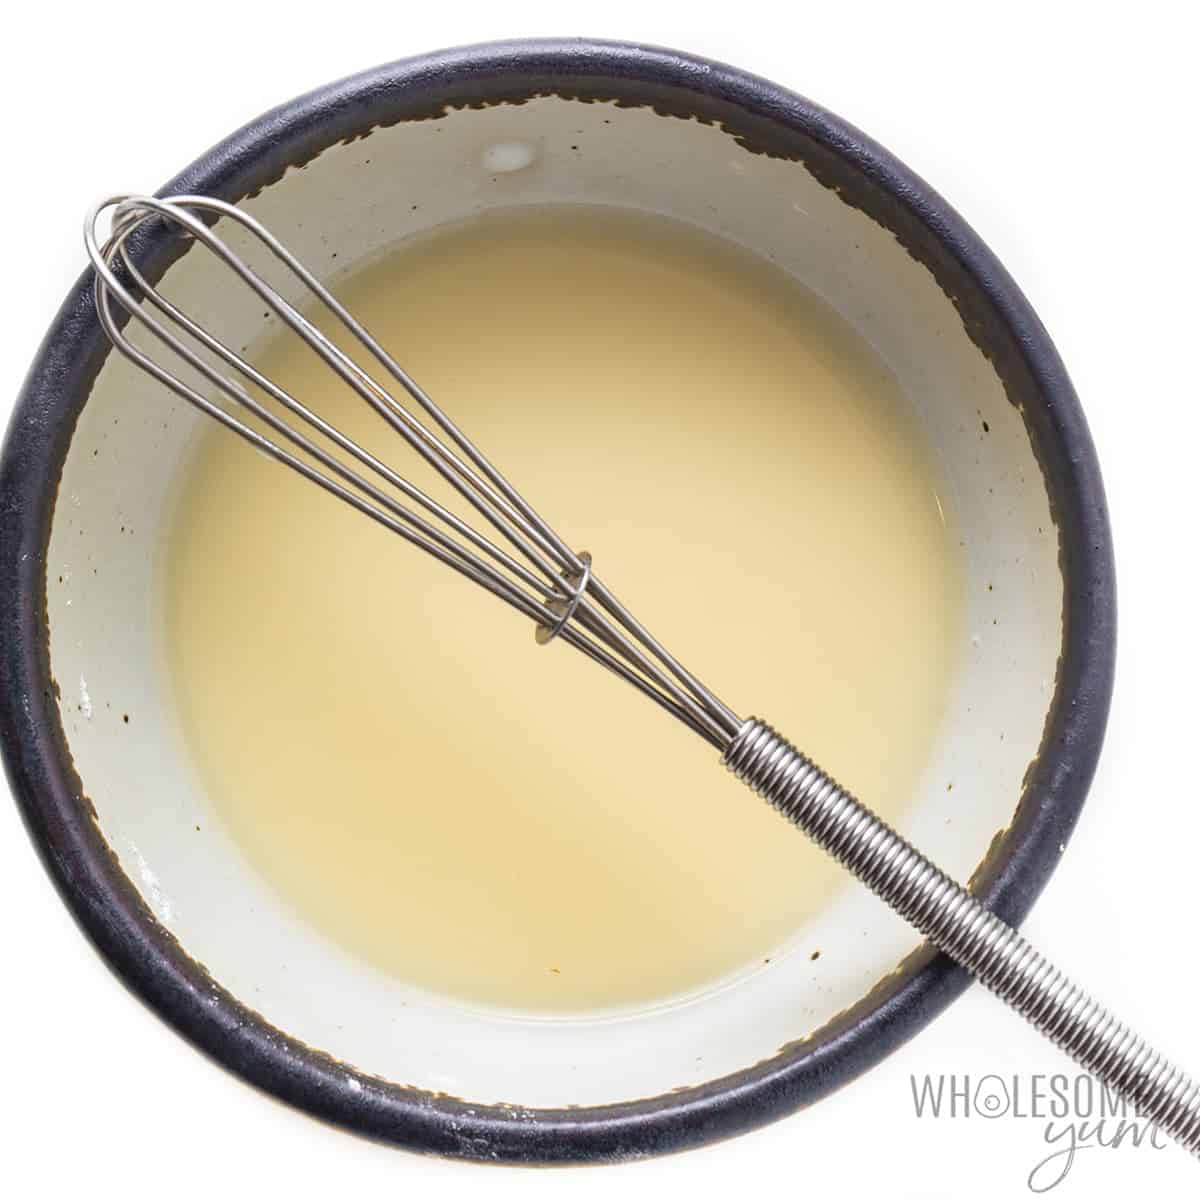 Broth and arrowroot powder whisked in a bowl